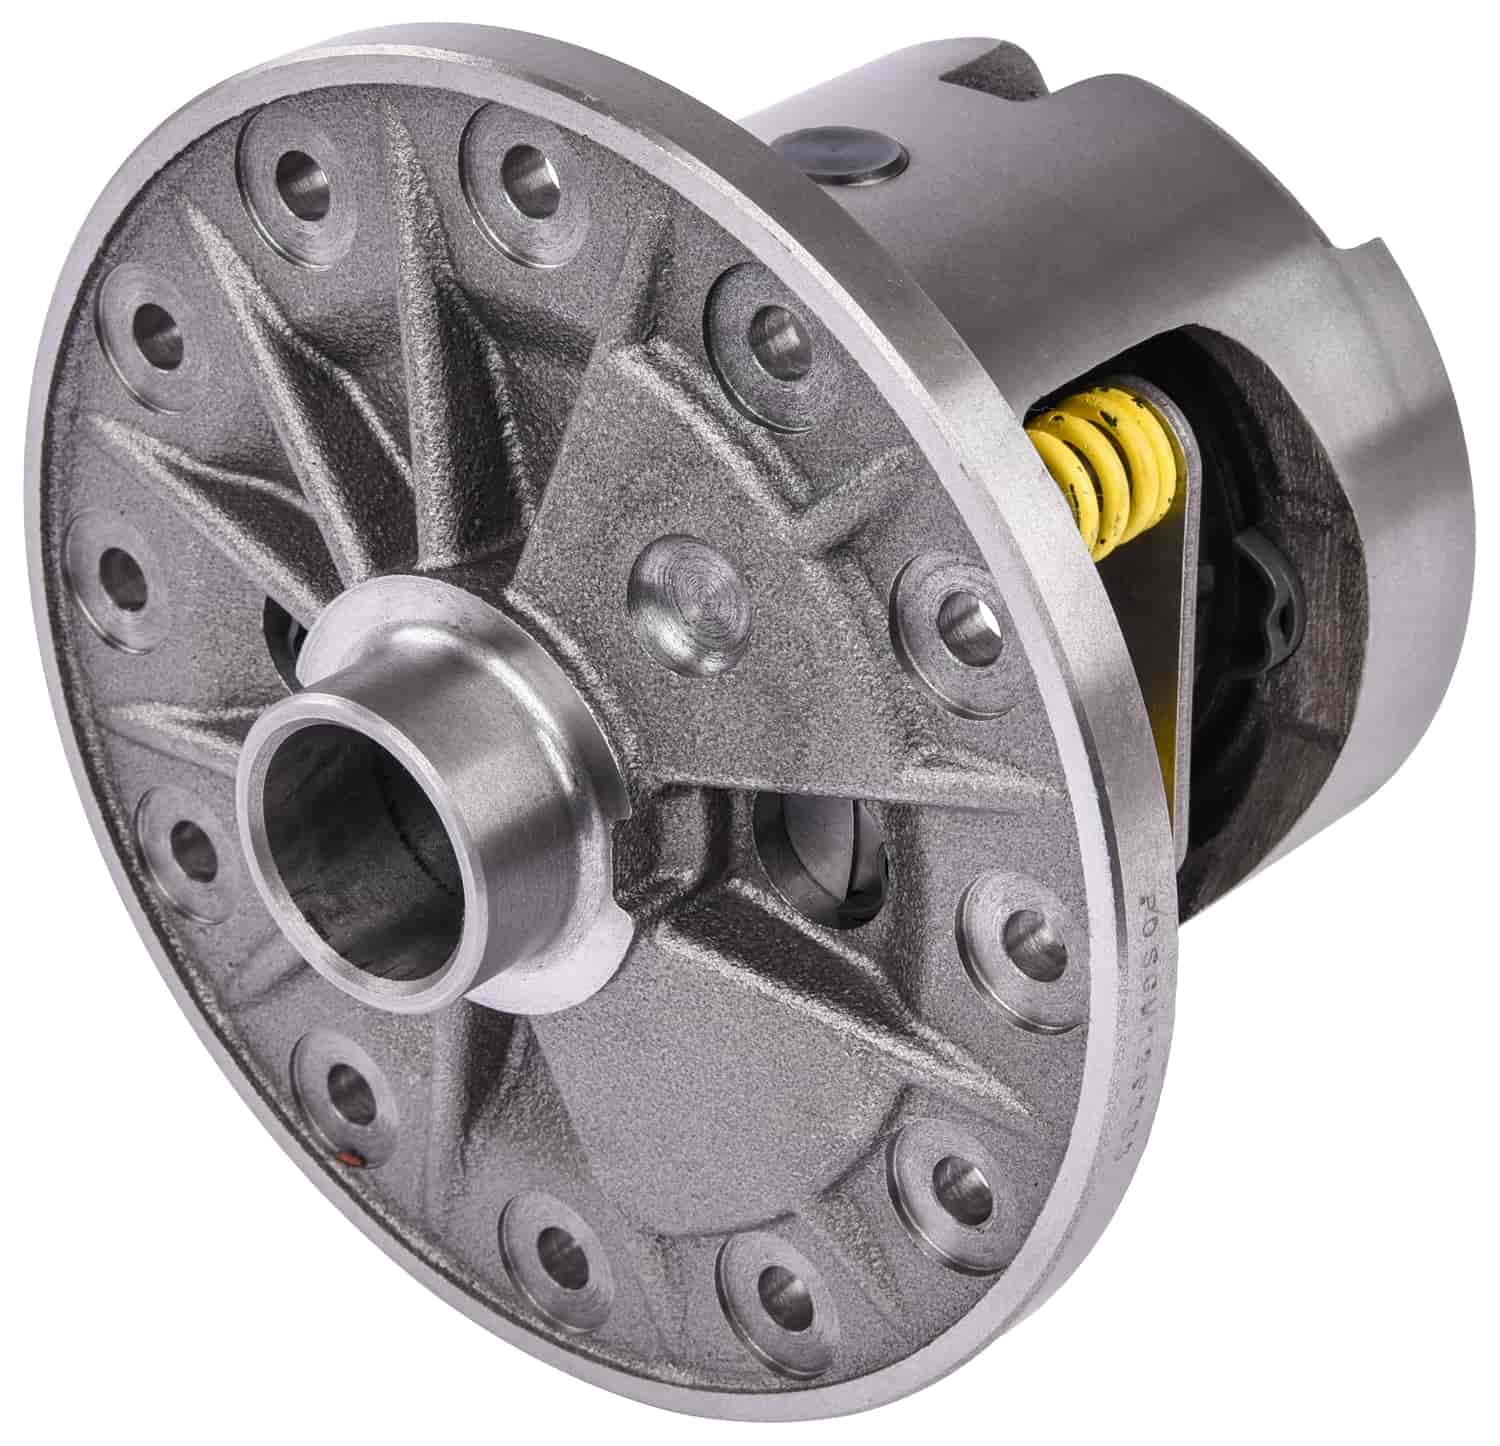 Posi Traction Differential for GM Car 12-Bolt 8.875 in. Rear, 33-Spline [3.08-3.90 Ratio]